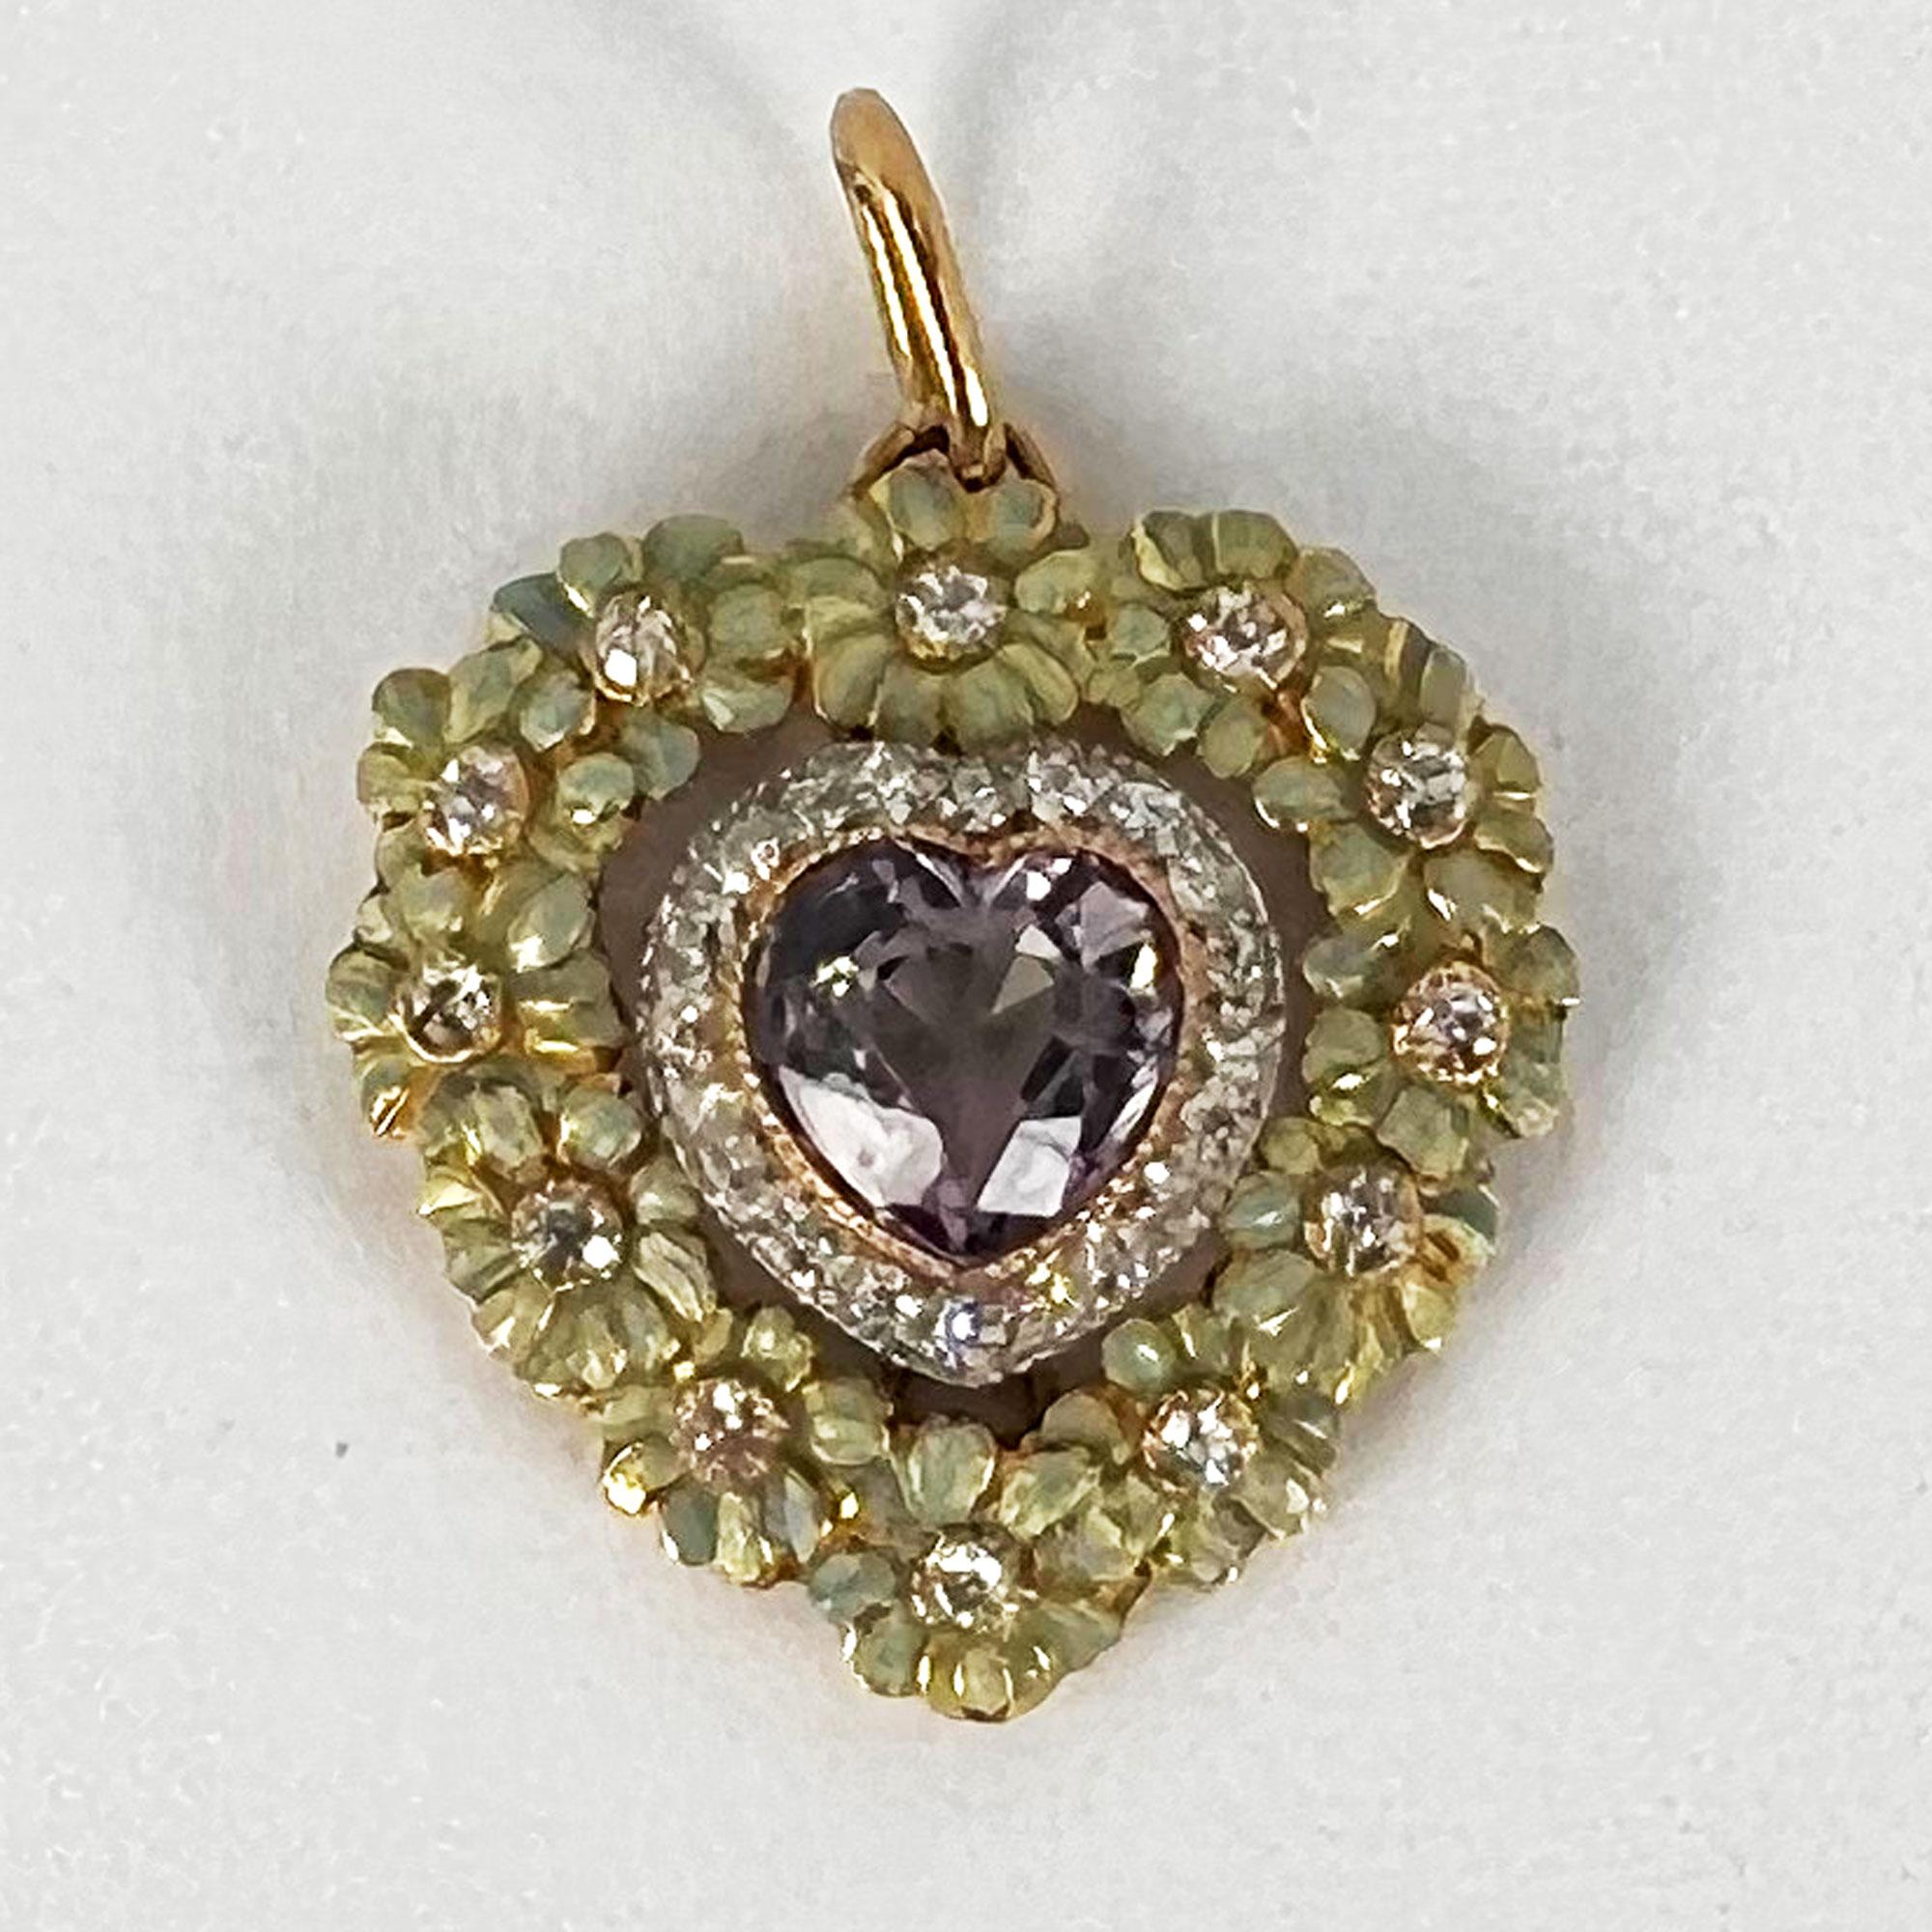 An exquisite platinum topped 18 karat (18K) yellow gold heart-shaped pendant centring a heart-shaped pink morganite weighing approximately 1.70 carats in a single-cut diamond surround, further surrounded by 12 blue-green enamelled flowers with